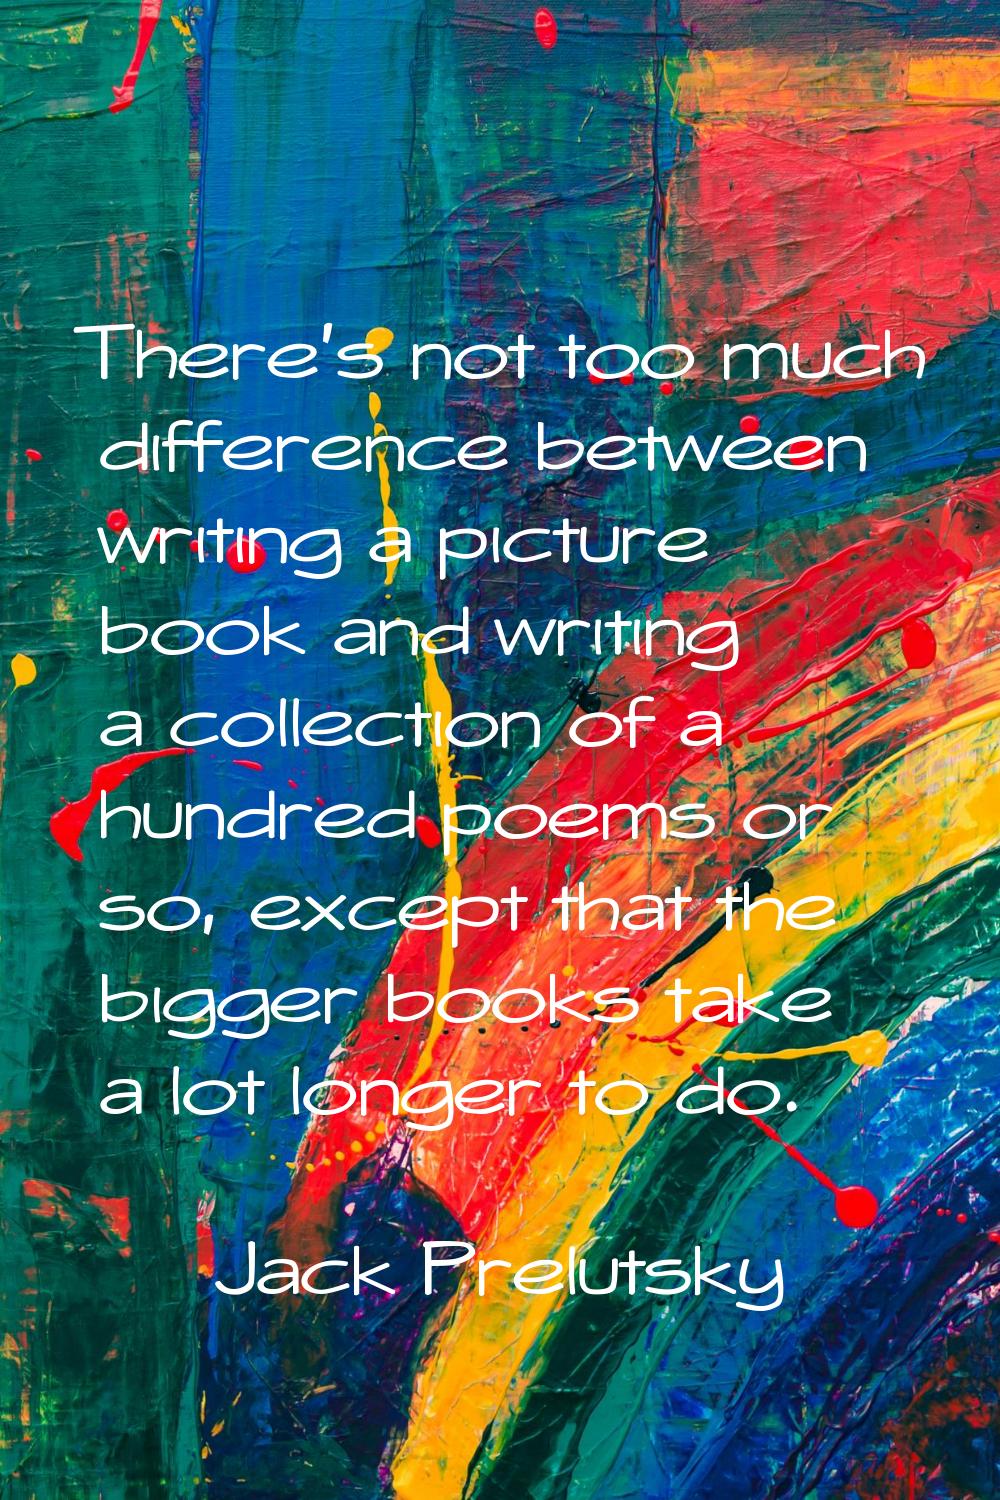 There's not too much difference between writing a picture book and writing a collection of a hundre